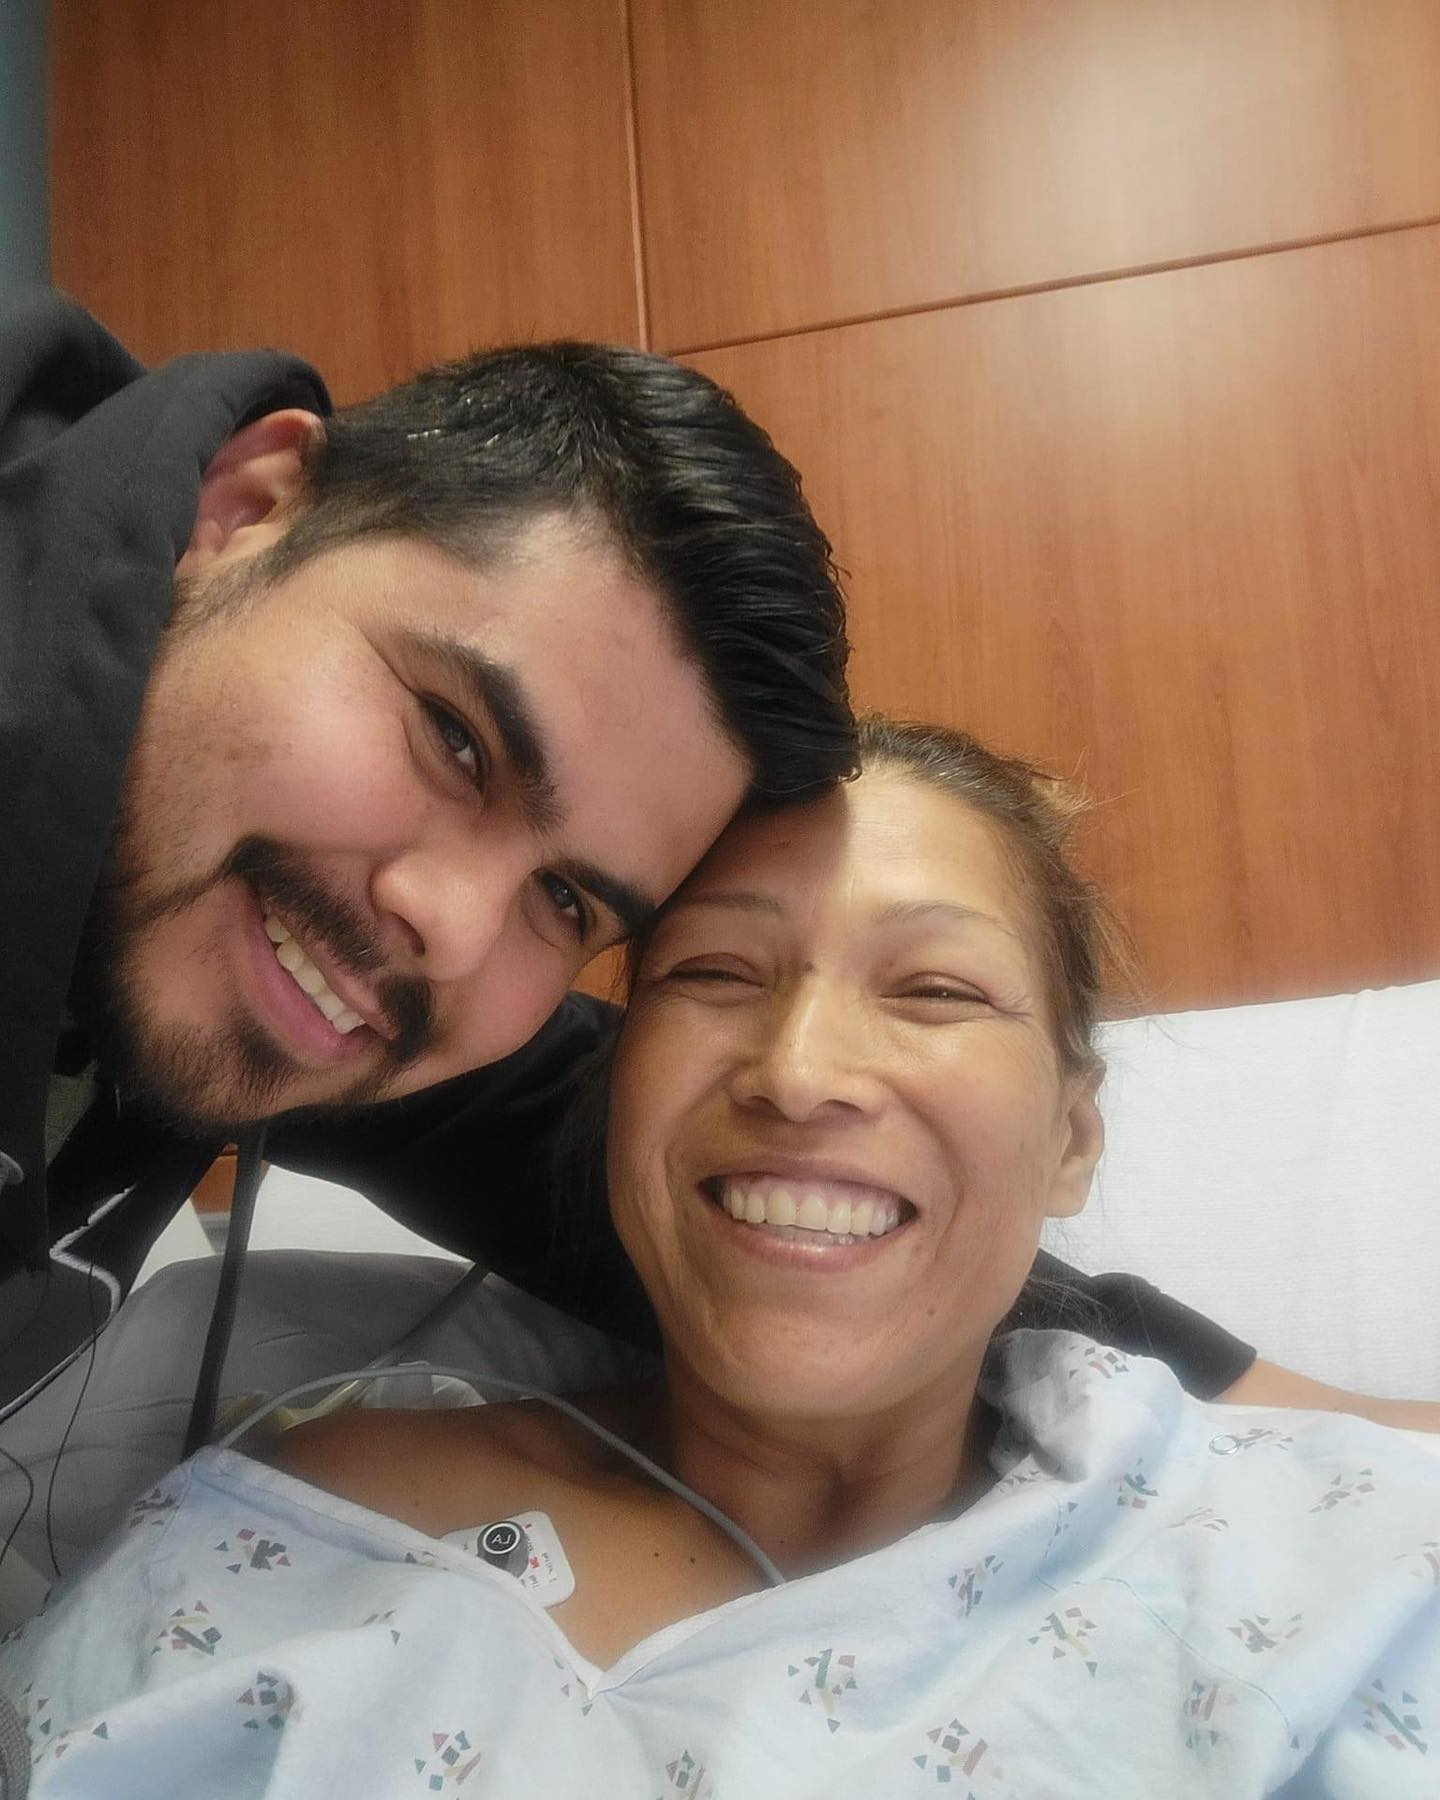 Since several of our friends and  clients donated to help make this possible, we wanted to share the amazing news!  Miguel’s wife Liliana,  received her long awaited kidney transplant this week.  Organ donation is such a gift and they both are truly amazing people.